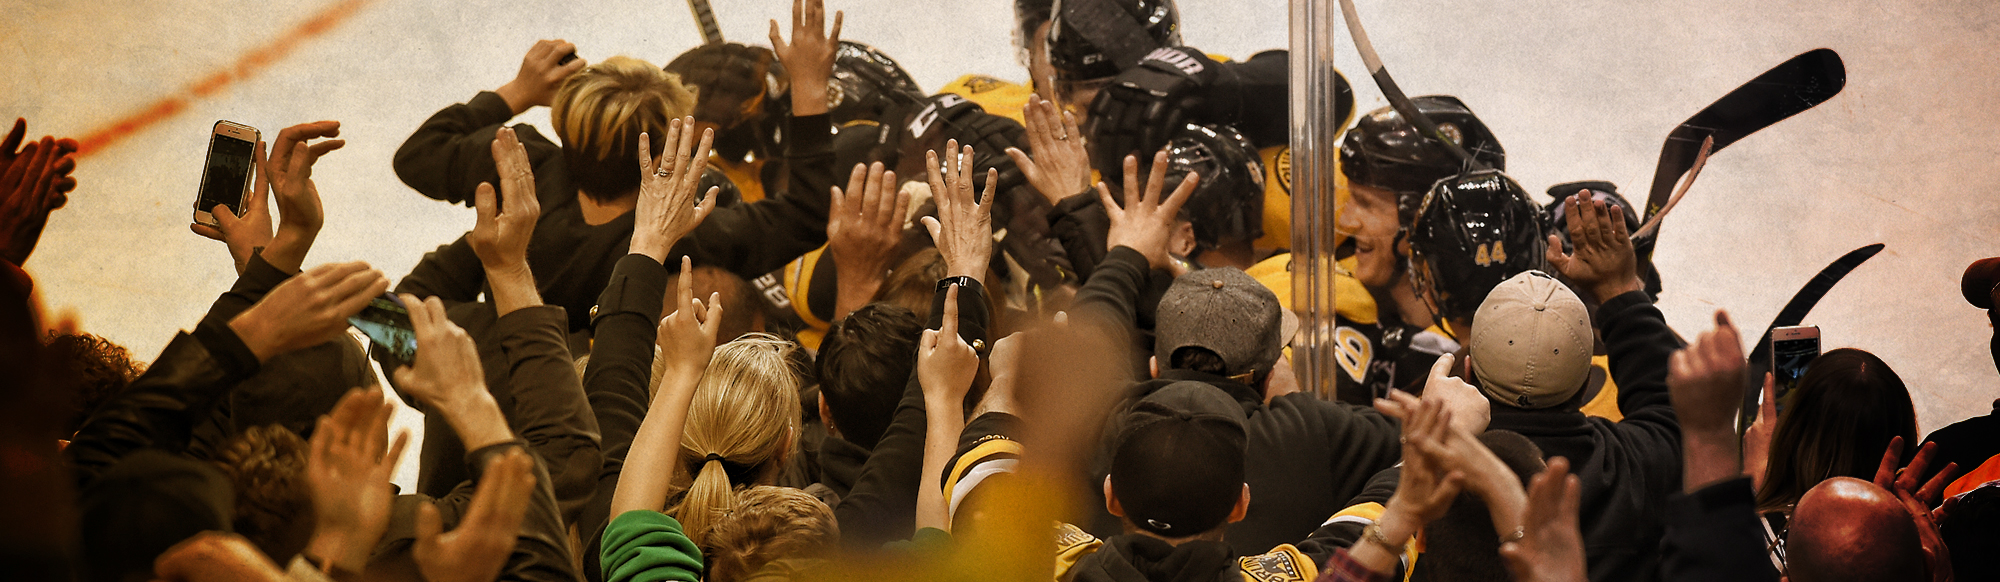 Boston Bruins on X: Join the Boston Bruins' season ticket waitlist and  receive priority access to seats when they become available as well as  additional benefits. Learn more and sign up at